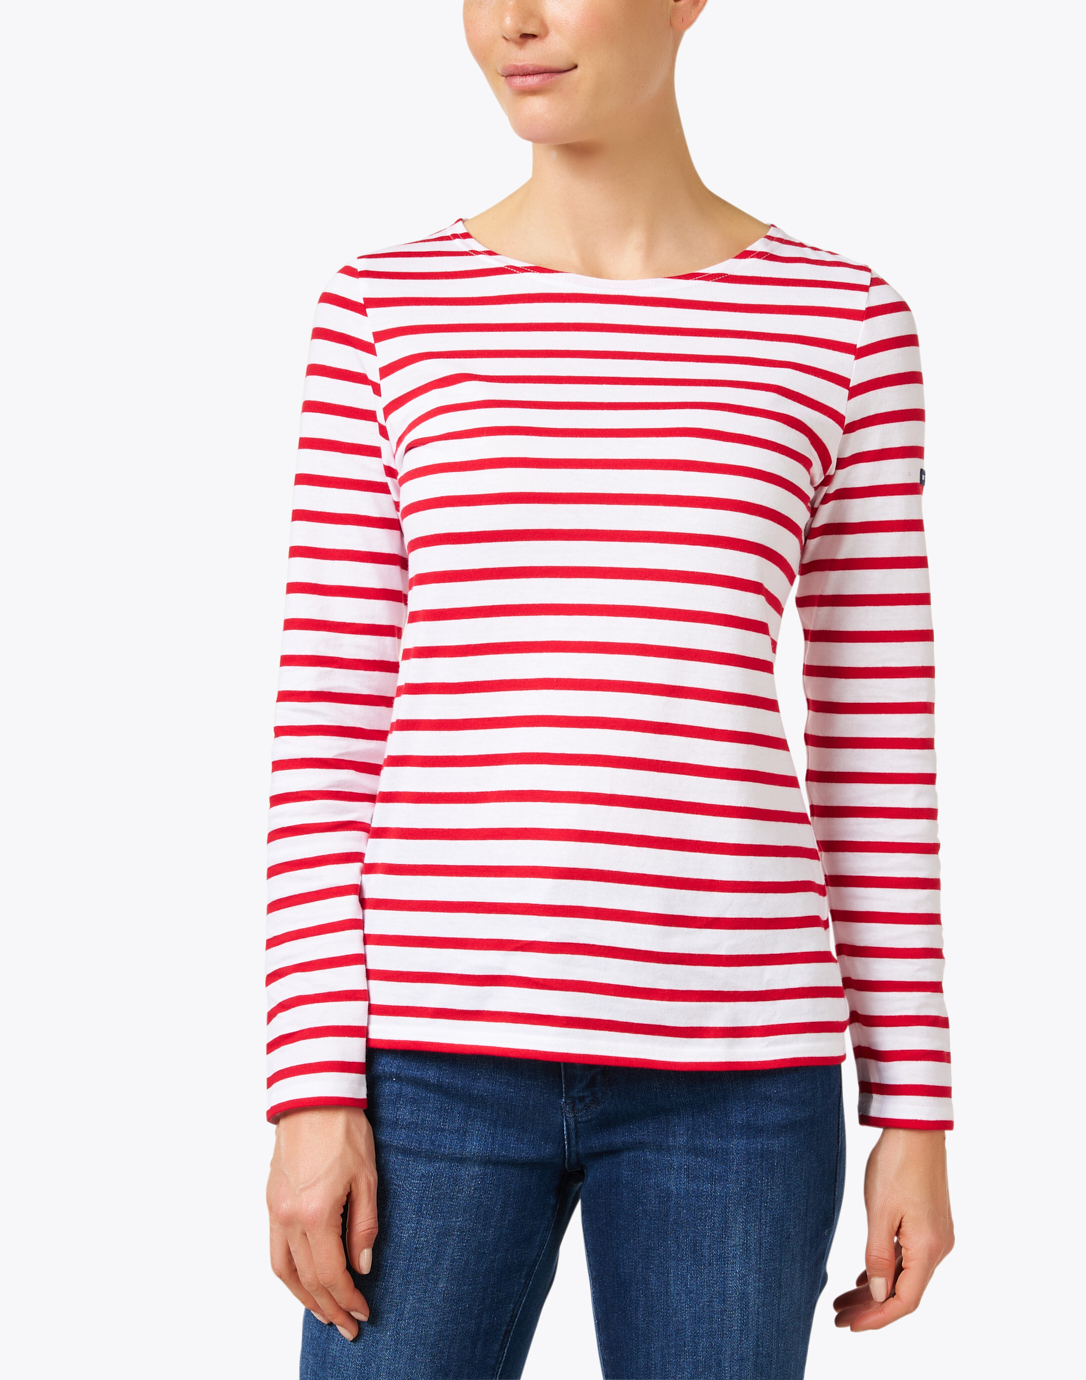 Minquidame White and Red Striped Cotton Top | Saint James